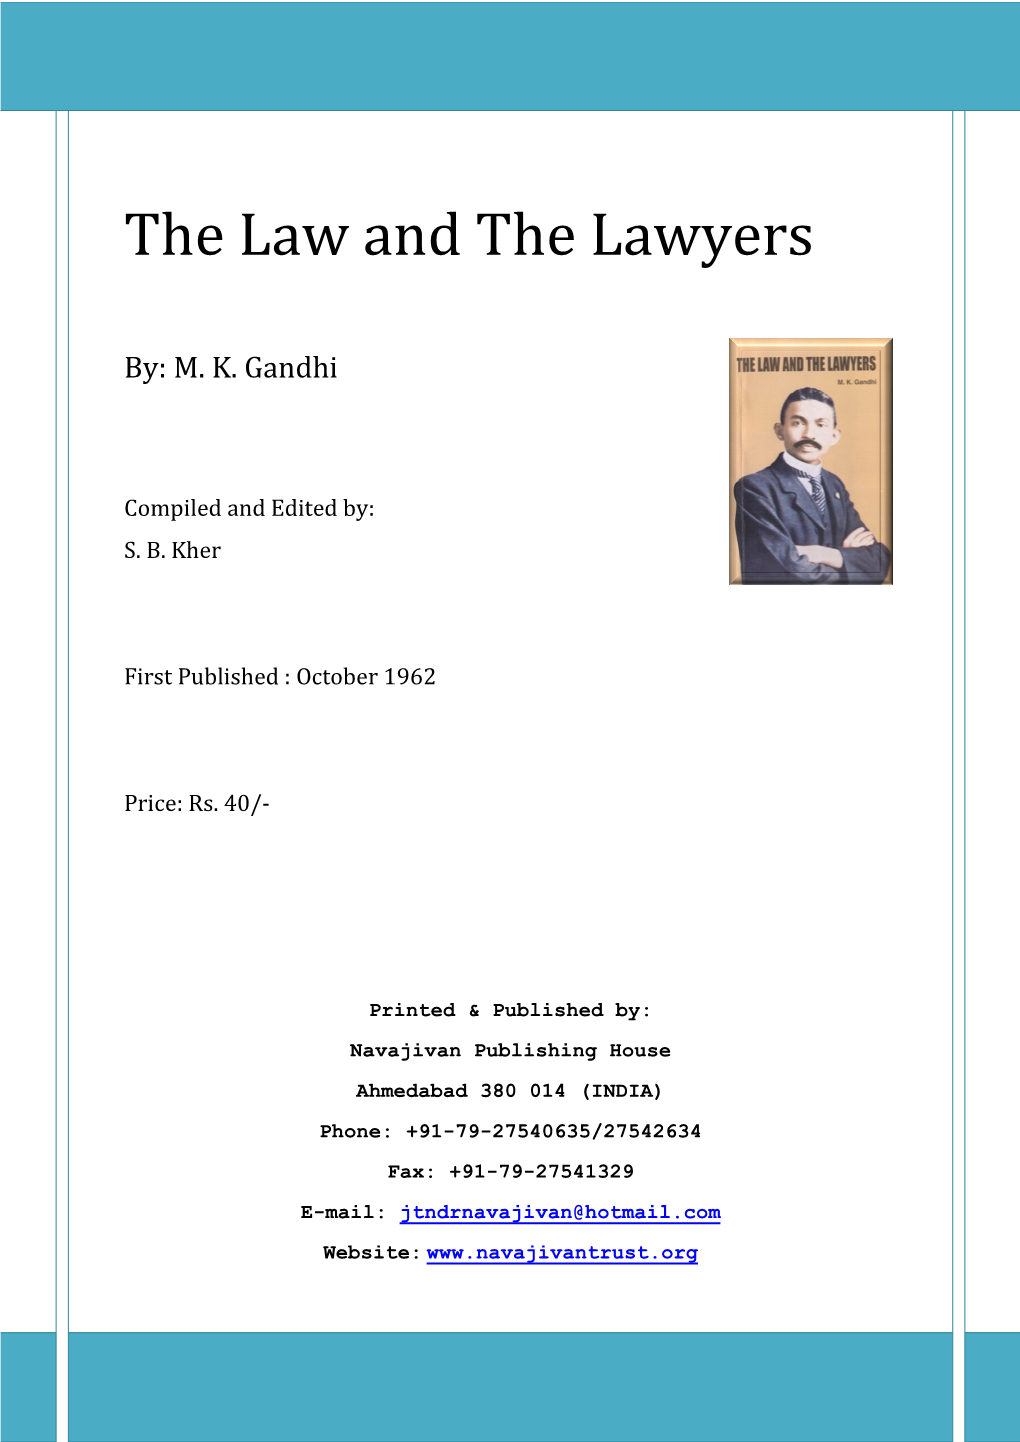 The Law and the Lawyers – M.K.Gandhi